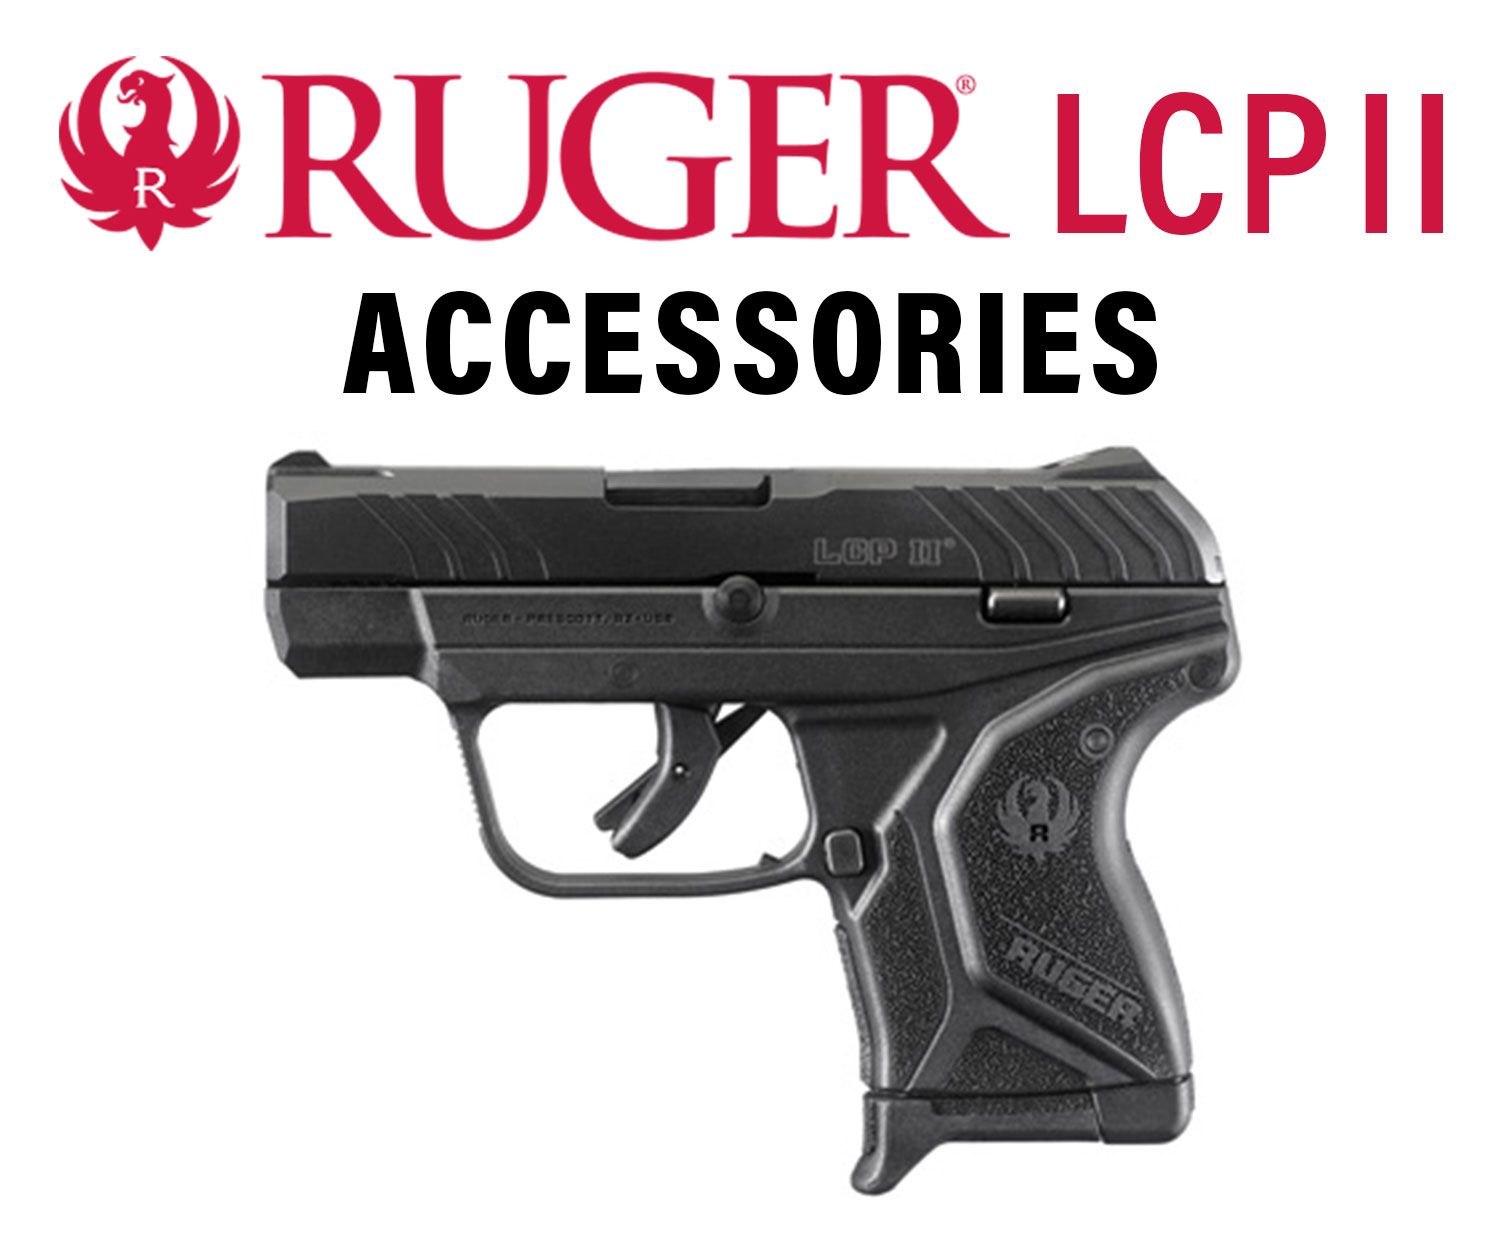  Ruger LCP II Accessories